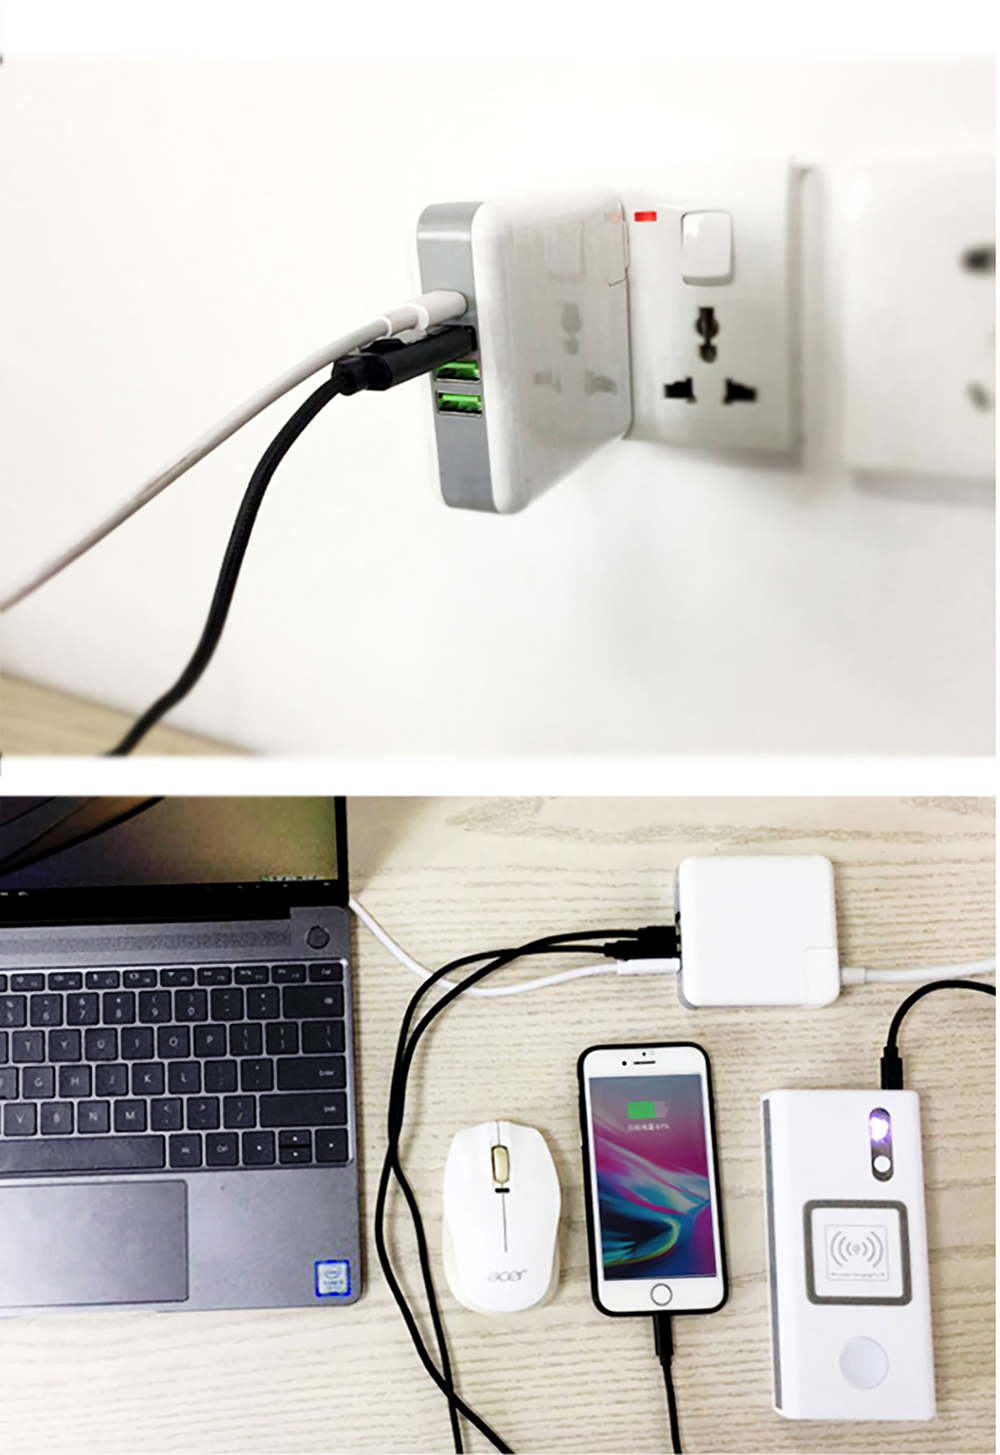 65W-Type-c-PD-QC30-USB-Fast-Charger-USB-C-Laptop-Power-Adapter-20V-3A-for--MACBOOK-PRO-Macbook-12-13-1554480